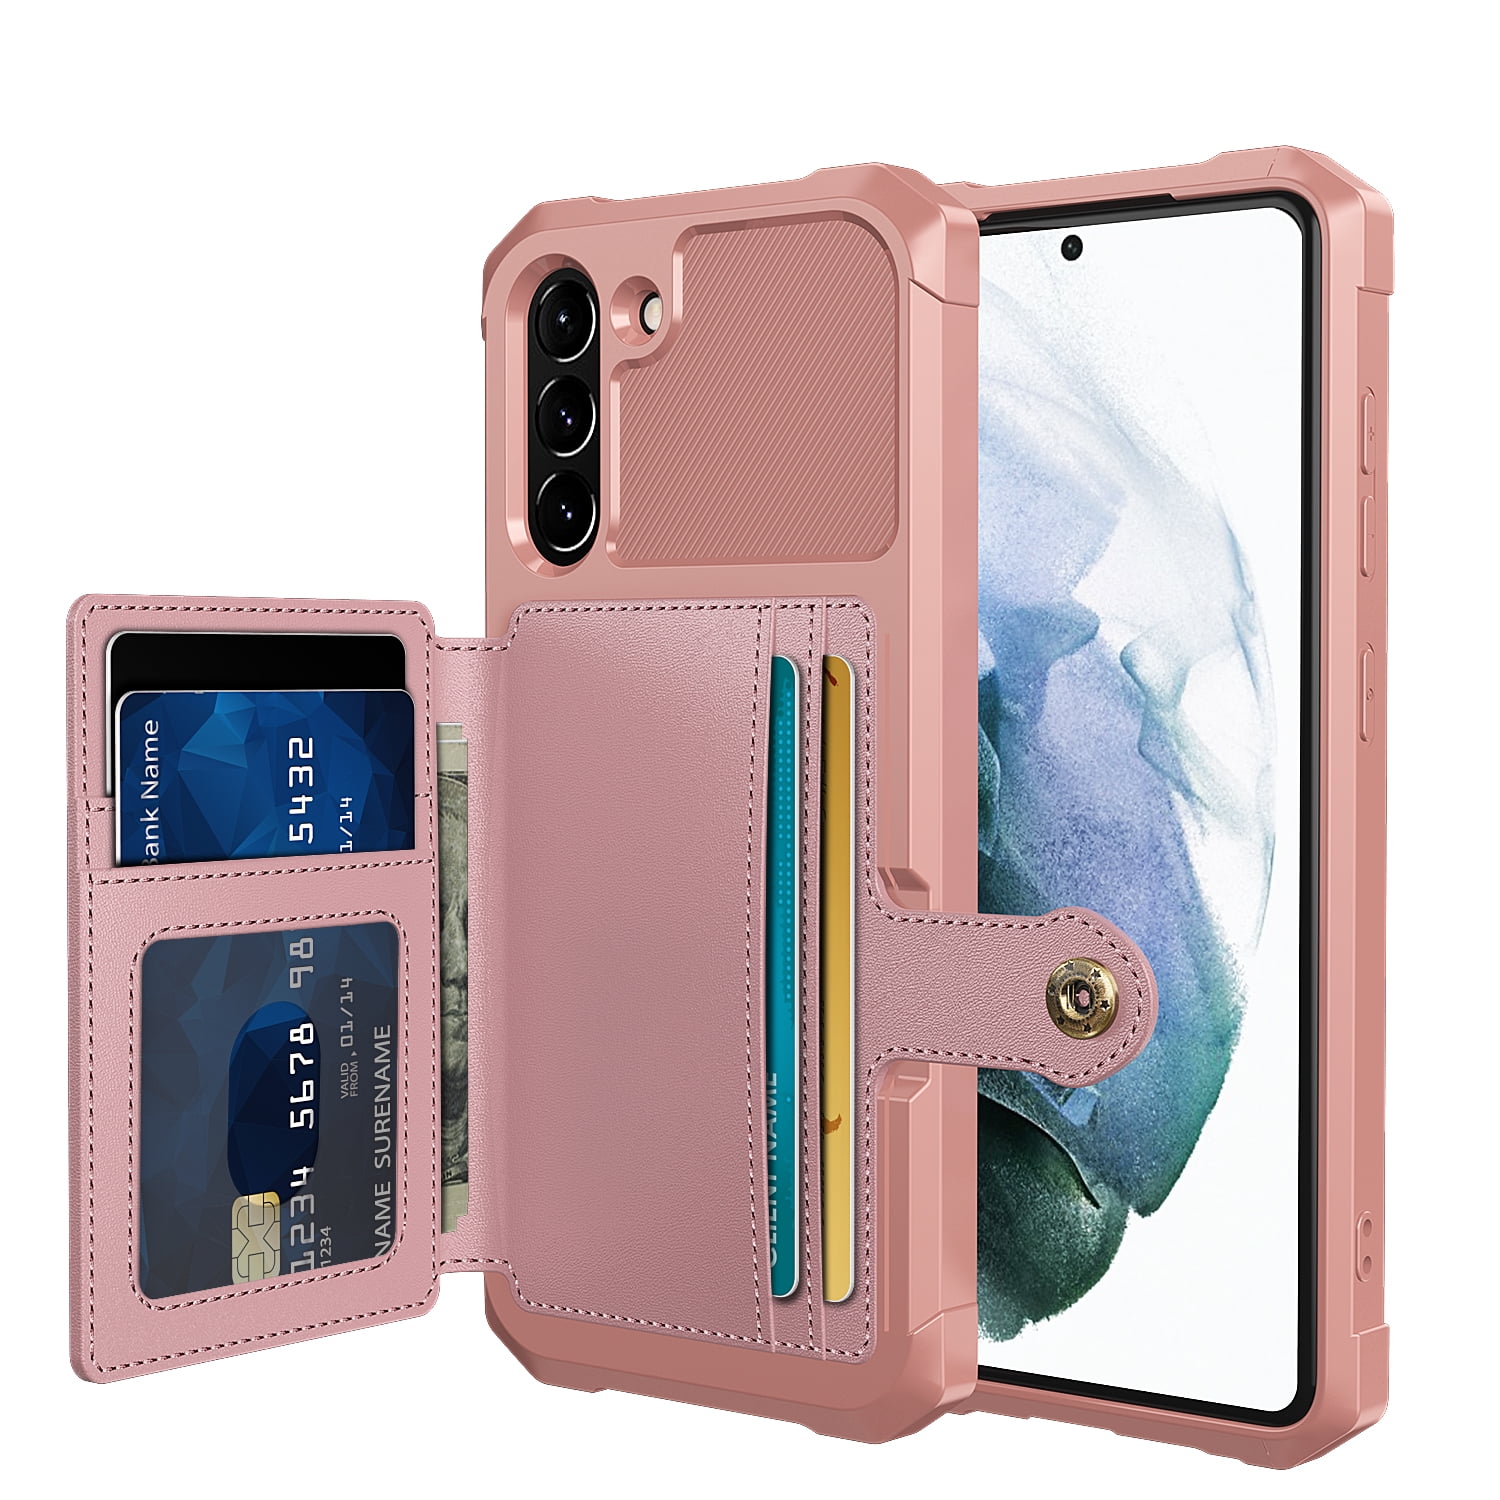  MEMAXELUS Compatible with Samsung Galaxy S21 FE 5G Wallet Phone  Case with Kickstand Card Holder Slot Magnetic Flip Case Premium PU Leather  Shockproof Protective Case for Samsung S21 FE 5G Pink